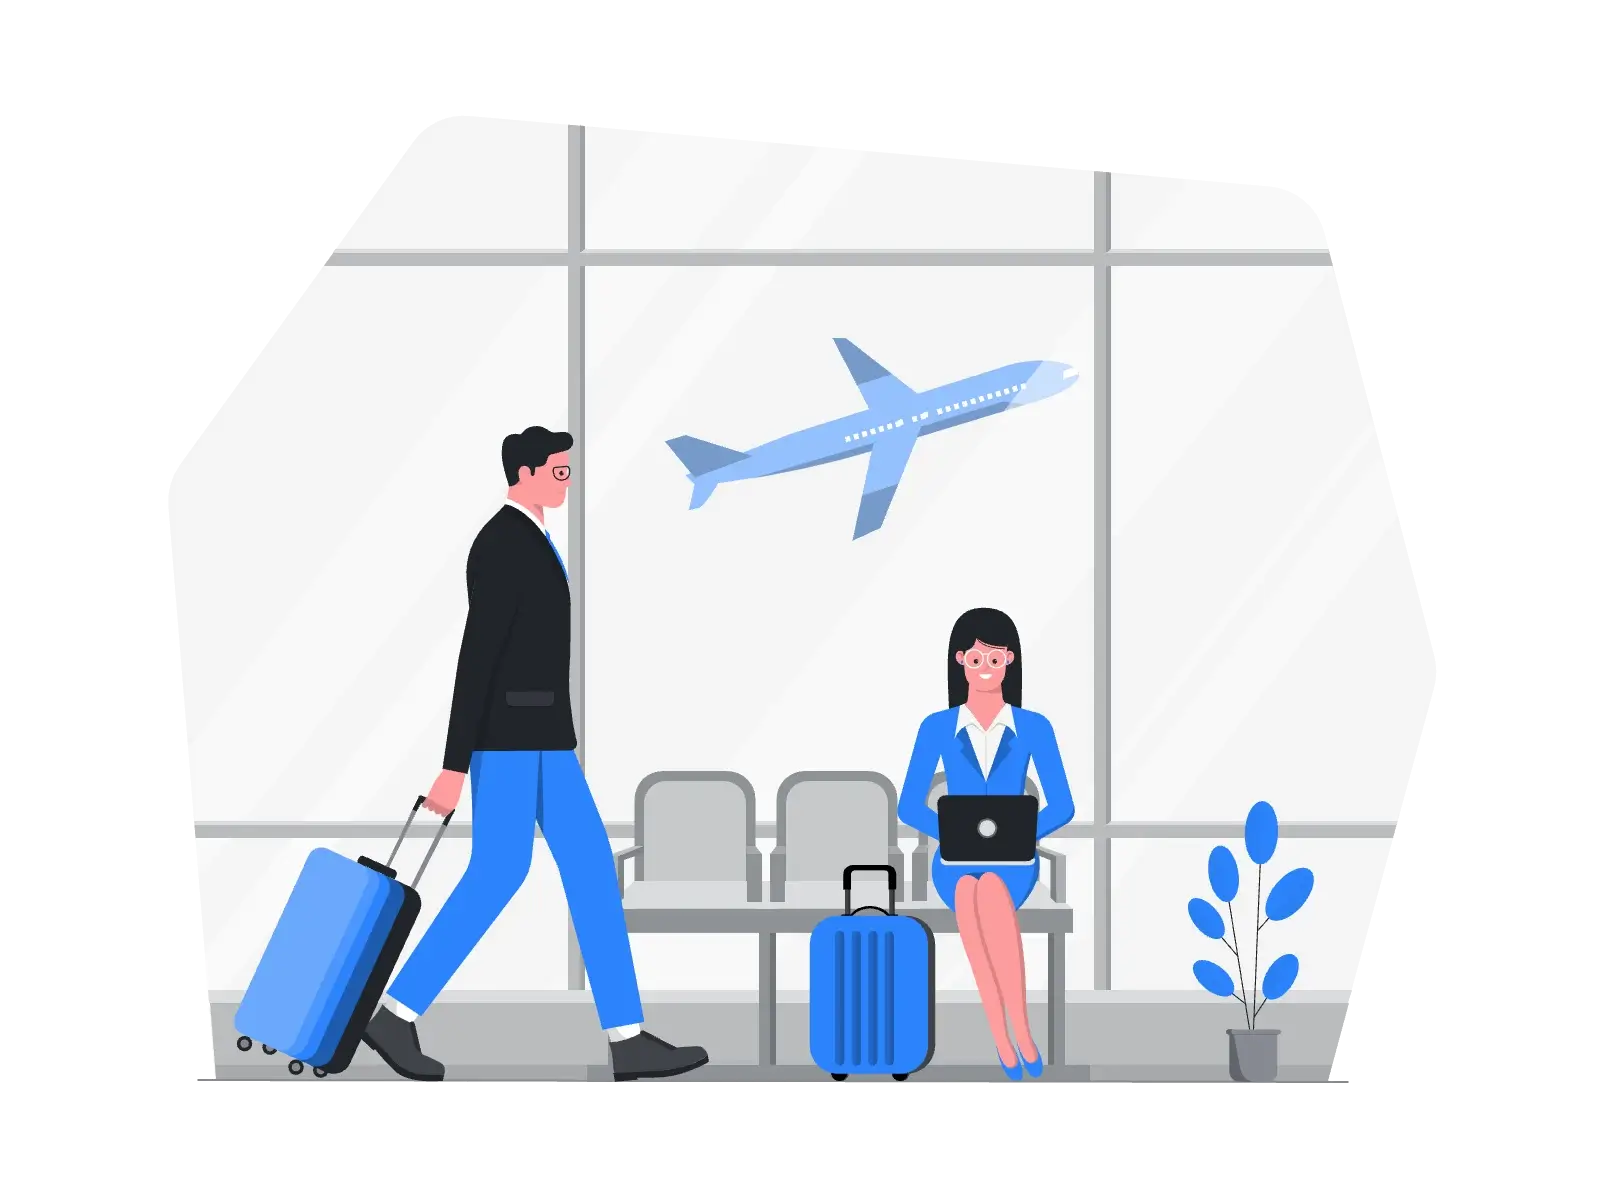 Graphic showing people at an airport with a plane taking off in the background.